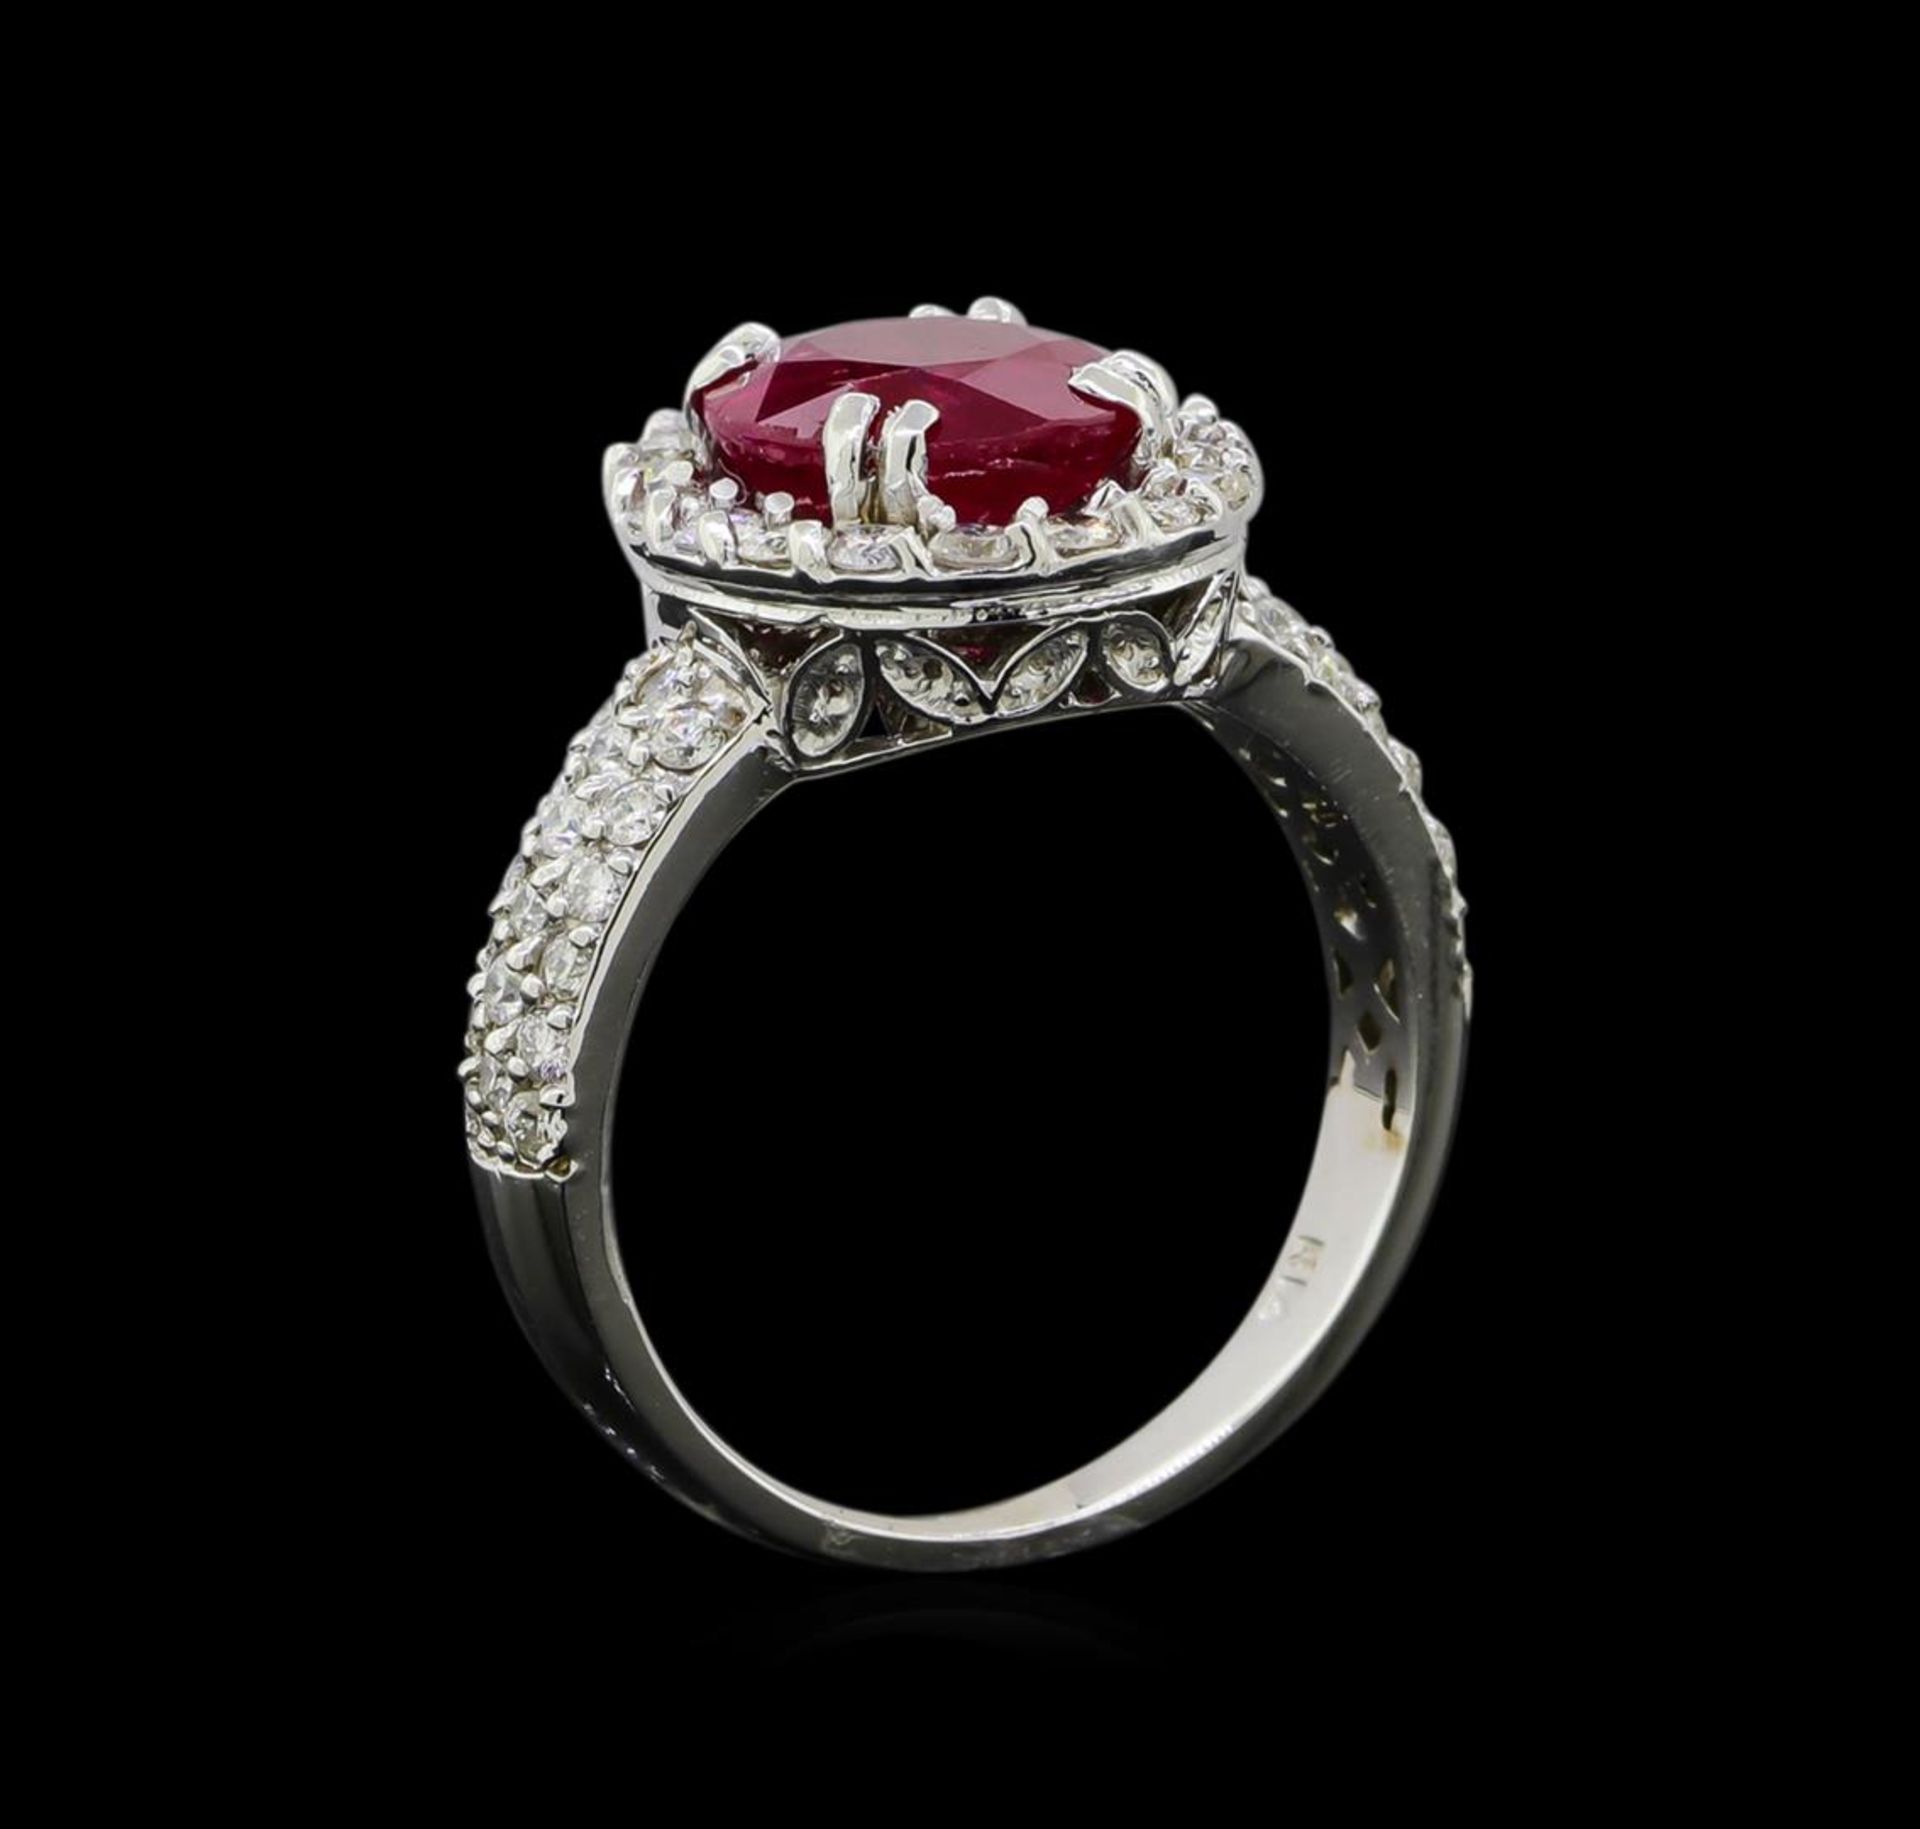 GIA Cert 3.24 ctw Ruby and Diamond Ring - 14KT White Gold - Image 4 of 6